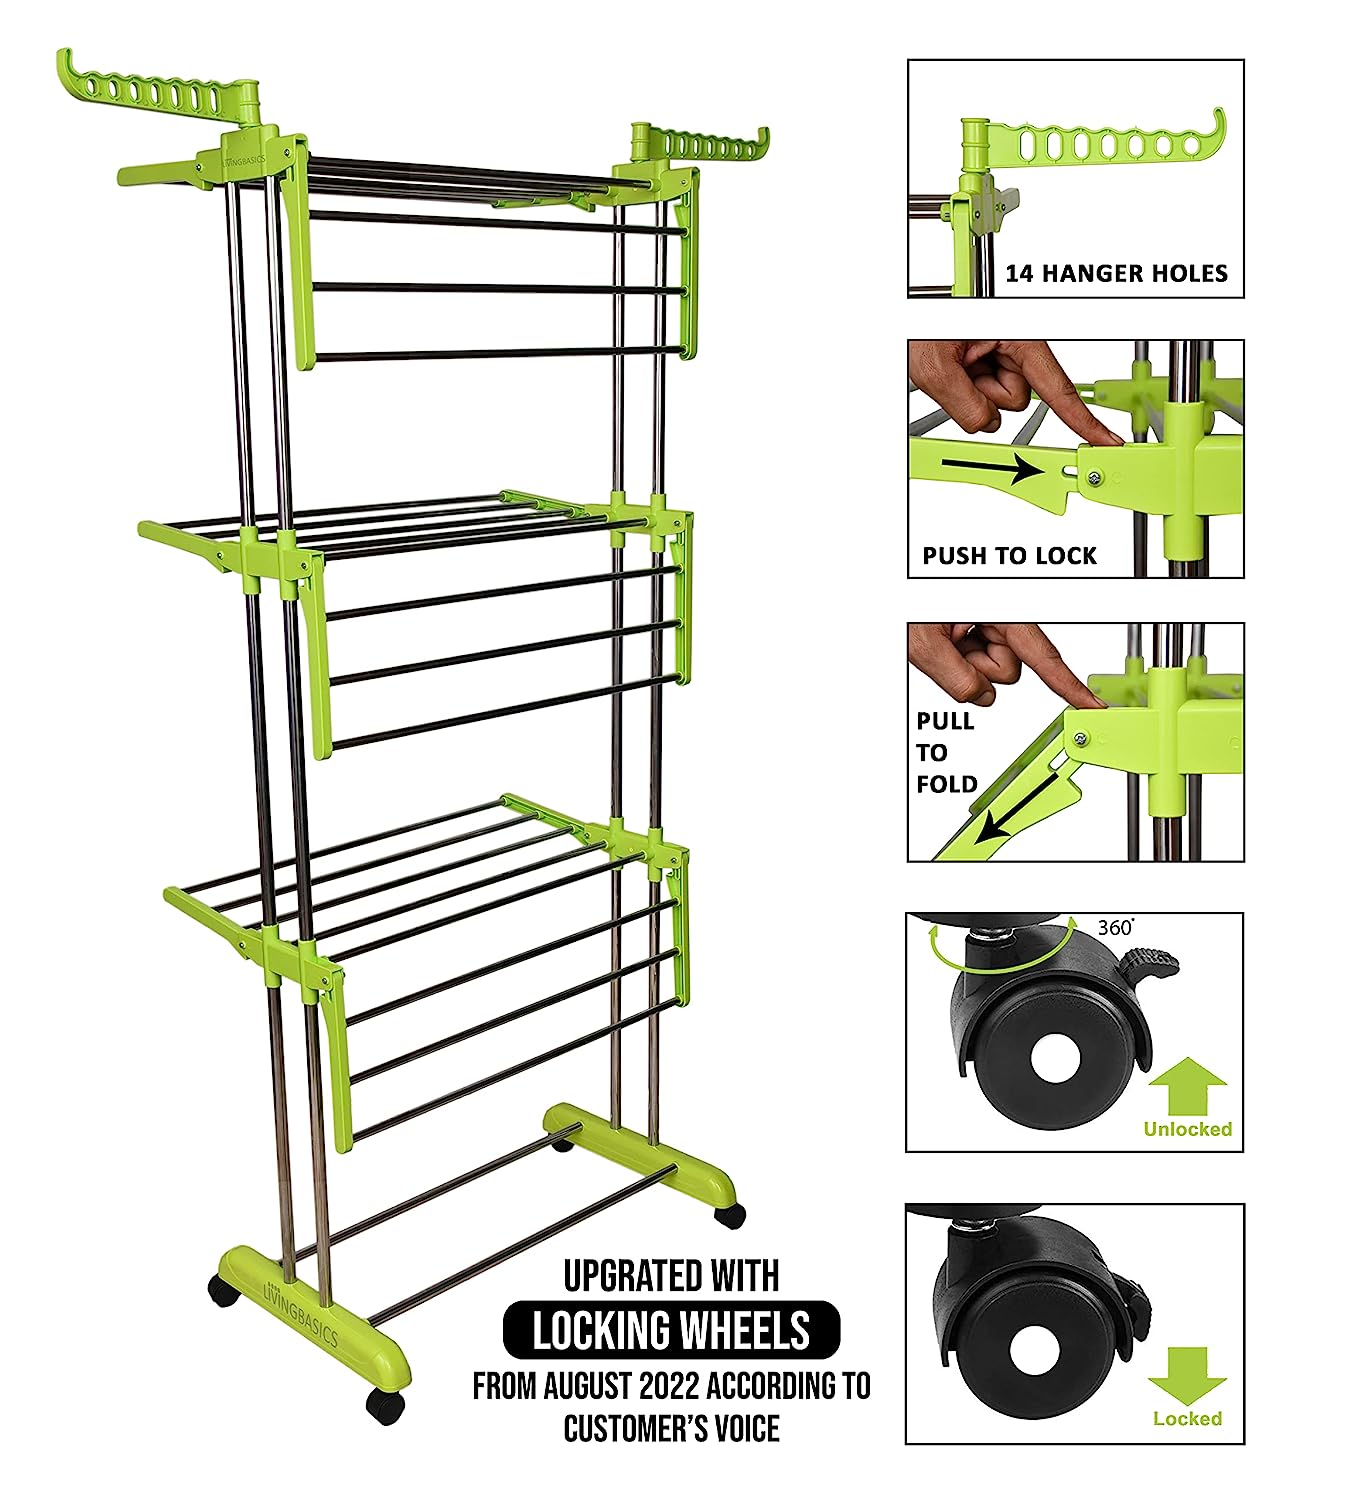 LivingBasics® Heavy Duty Rust-free Double Pole Clothes Drying Racks with Wheels for Indoor/Outdoor/Balcony (COMBO LIME GREEN + ROD CLOTH CLIP)(ABS PLASTIC)